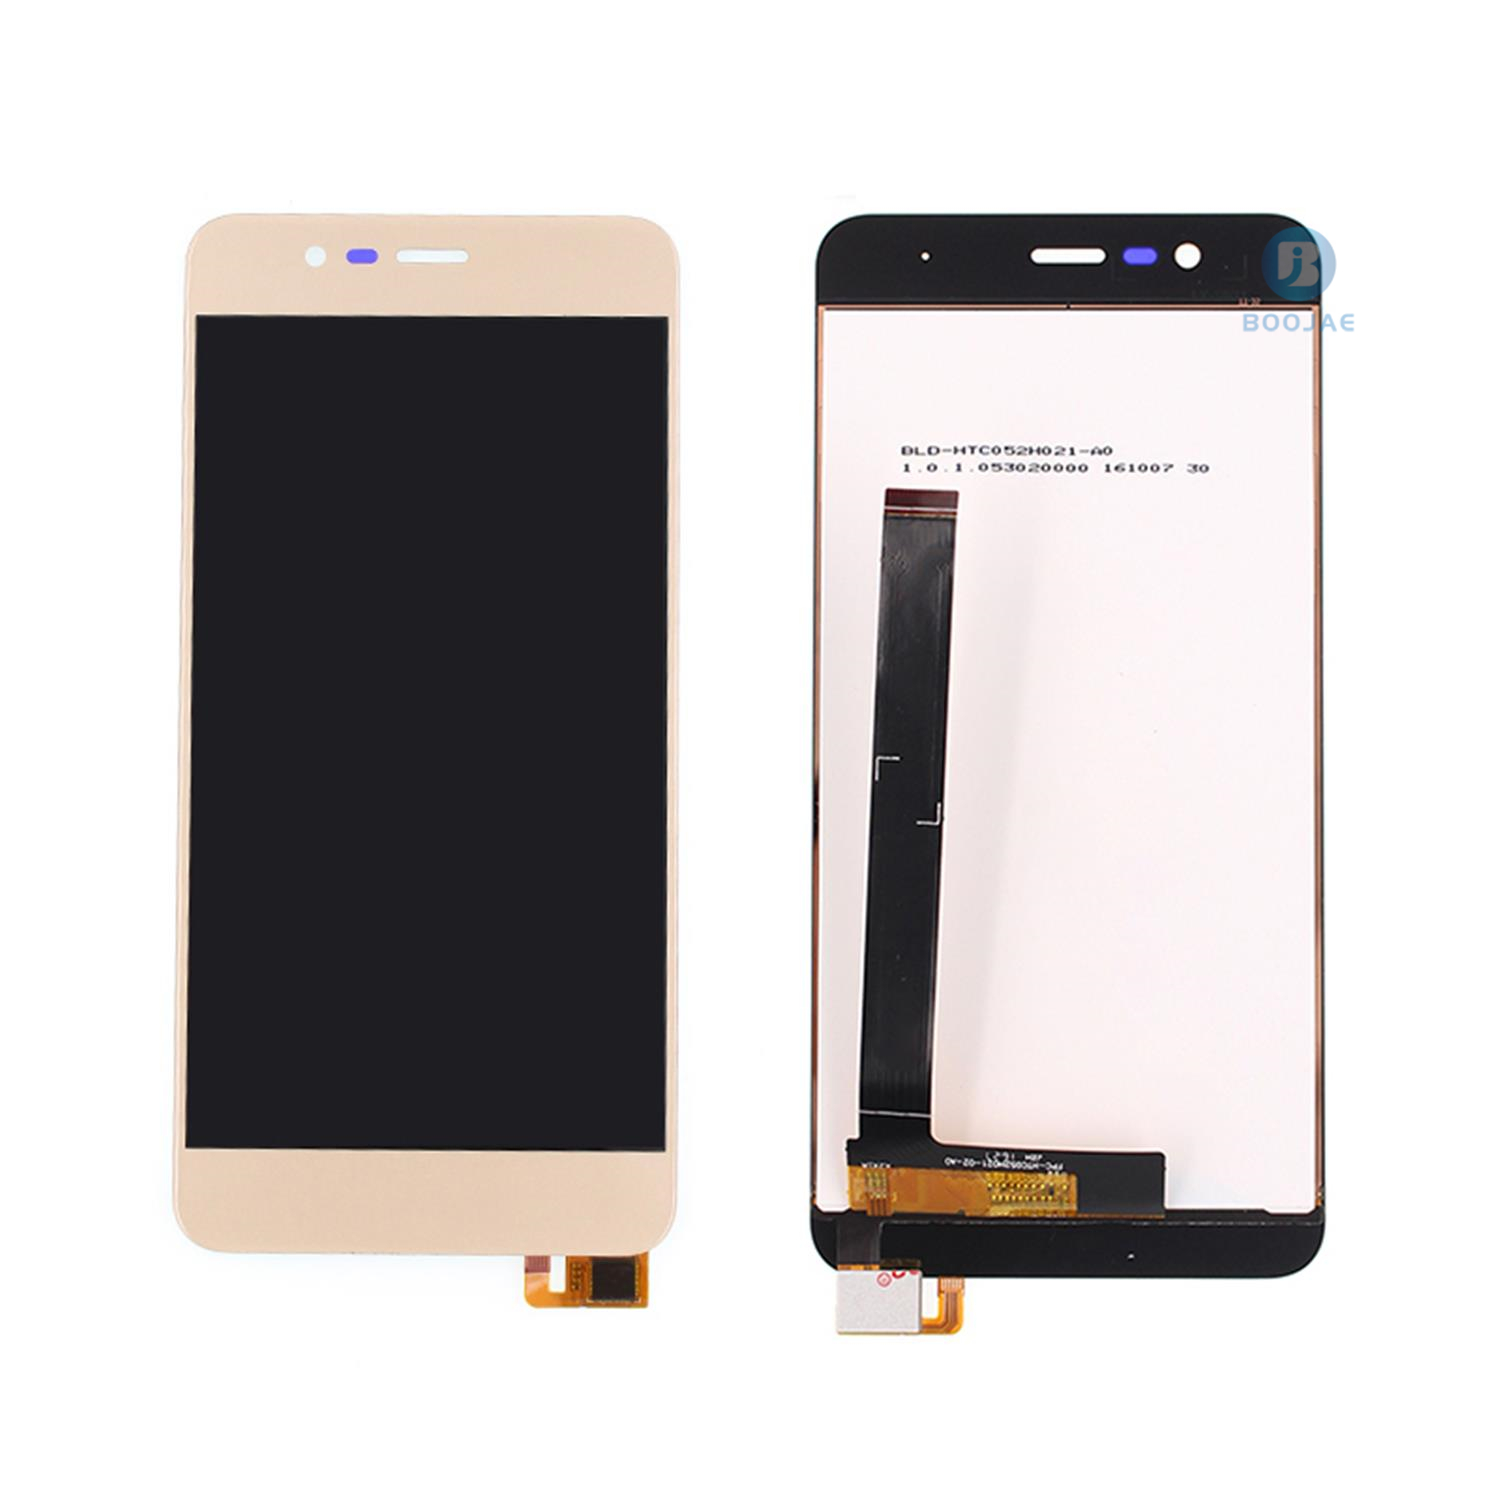 For Asus Zenfone ZC520TL LCD Screen Display and Touch Panel Digitizer Assembly Replacement